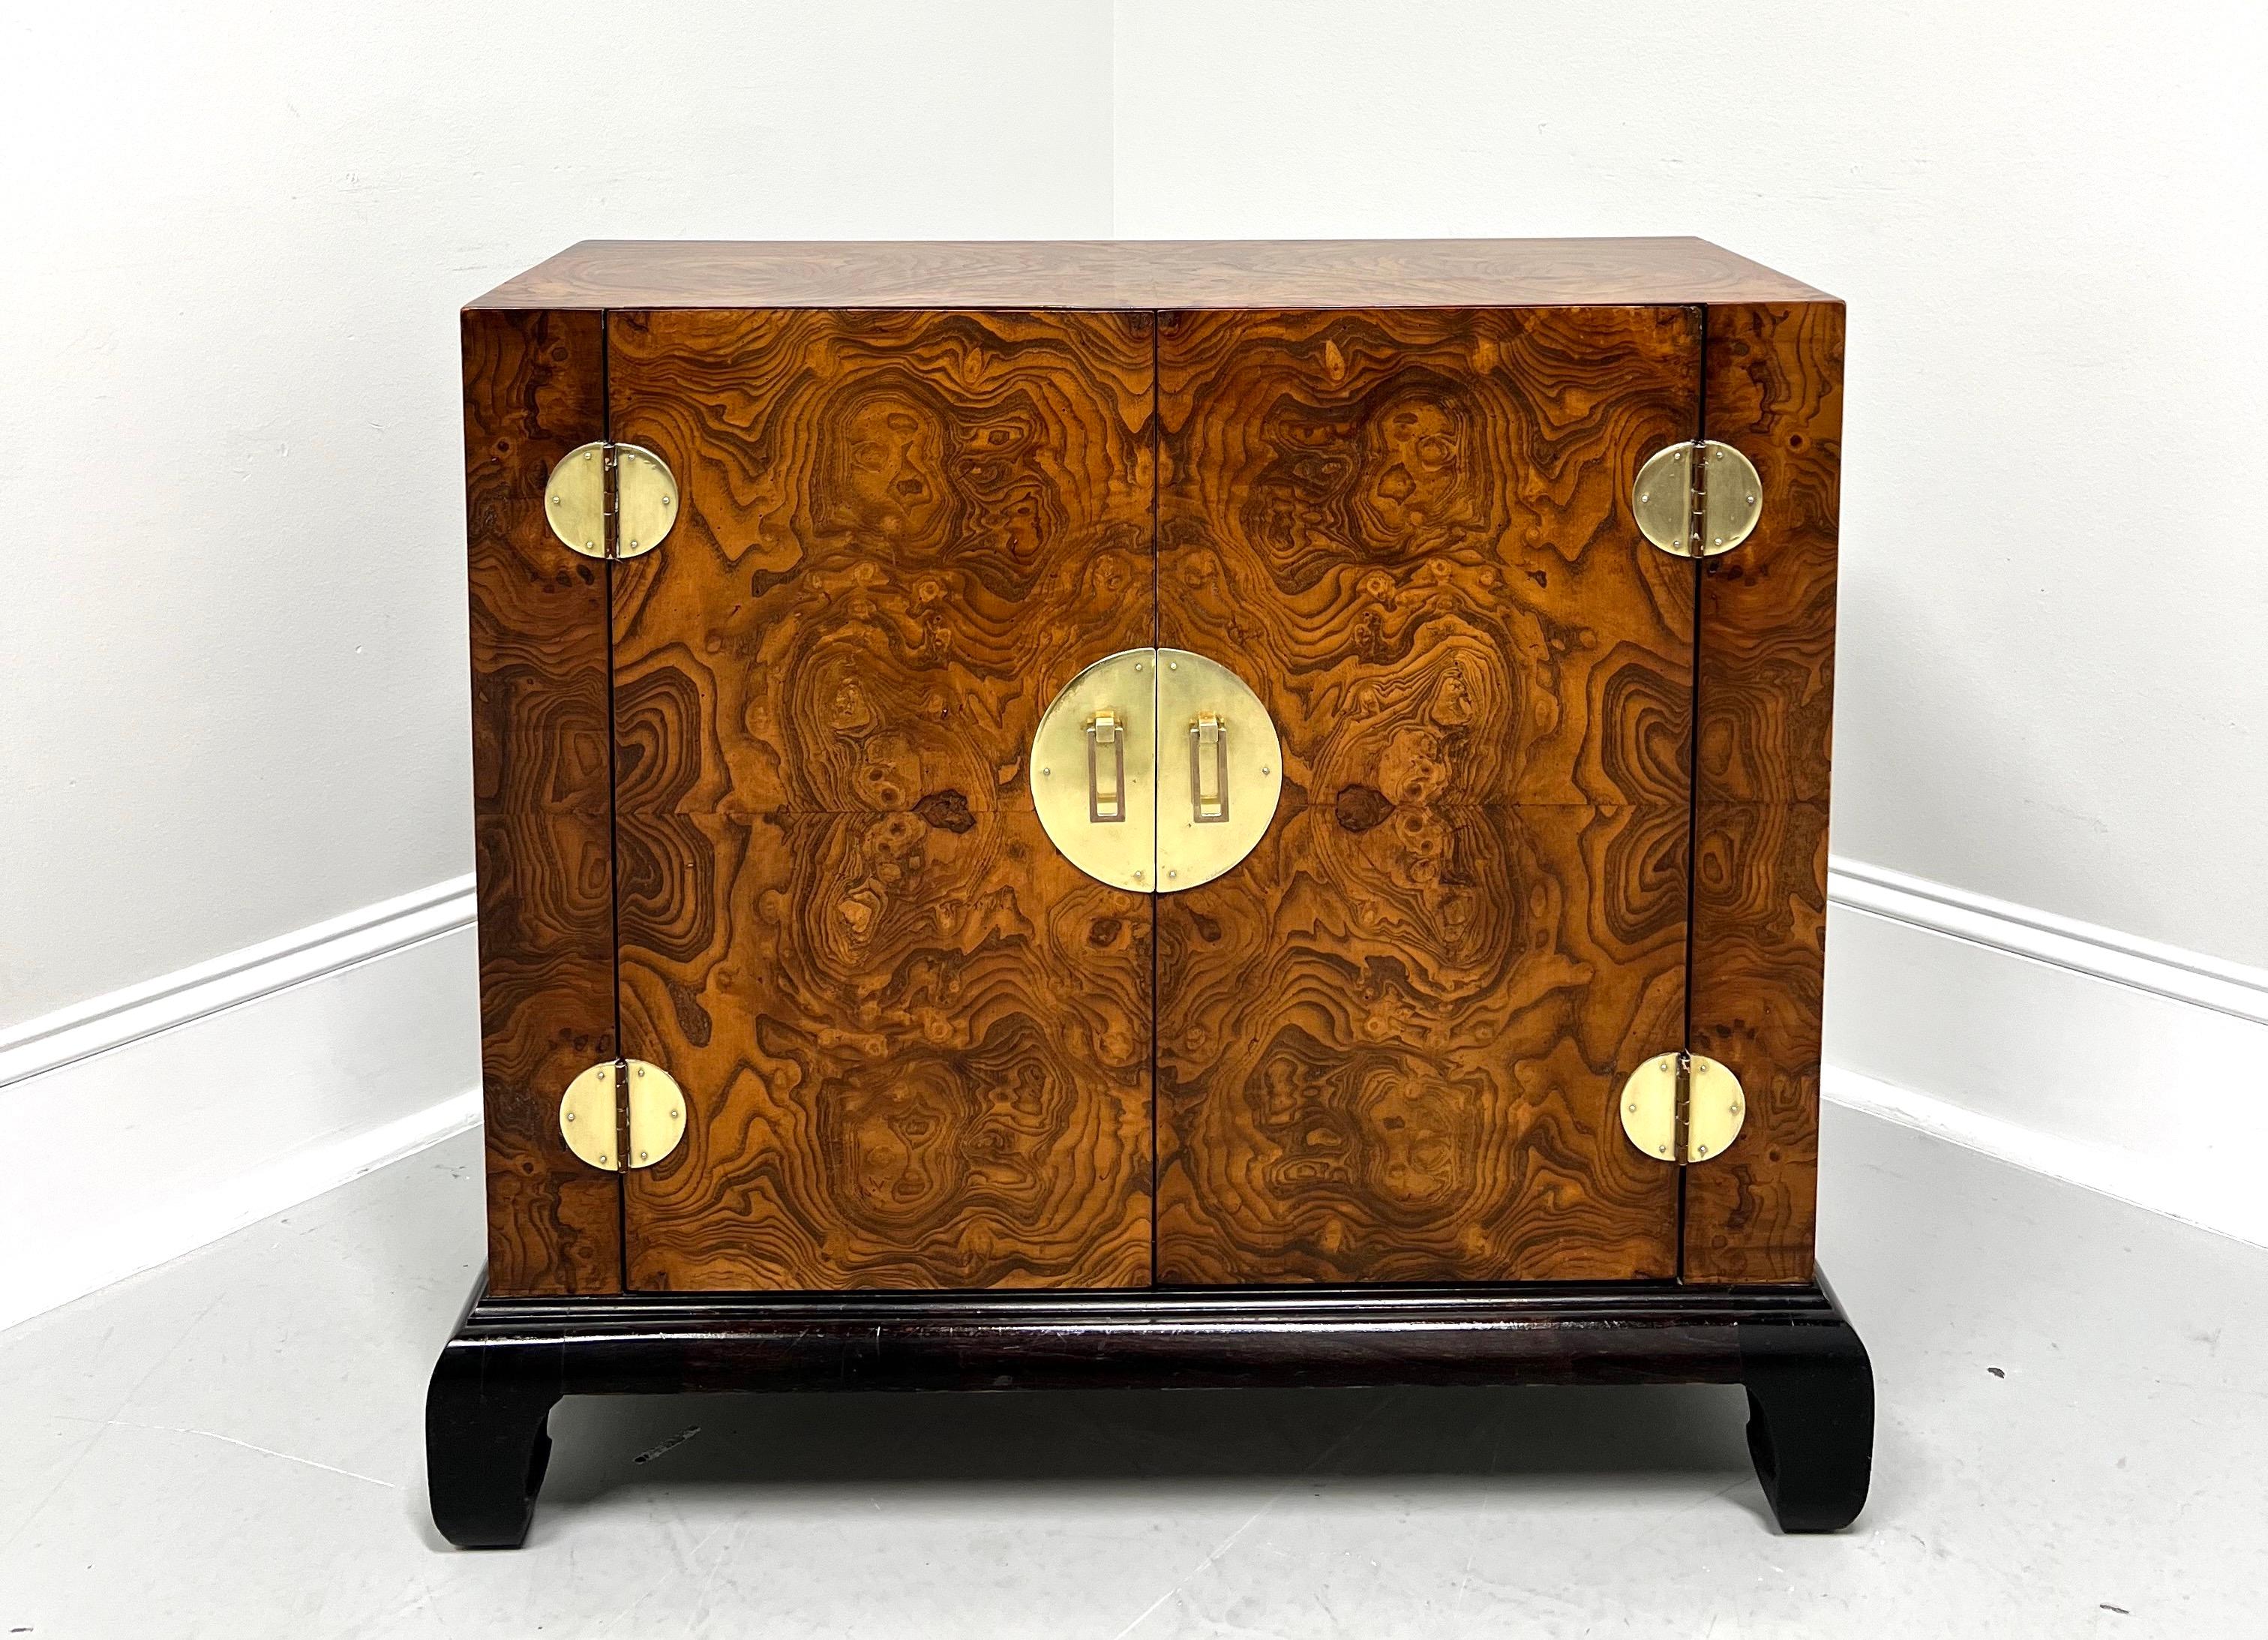 An Asian Ming style narrow console cabinet, unbranded. Burlwood with smooth surface top, brass hardware & accents, and Ming style black lacquered feet. Features two doors revealing interior storage with one fixed wood shelf. Likely made in the USA,